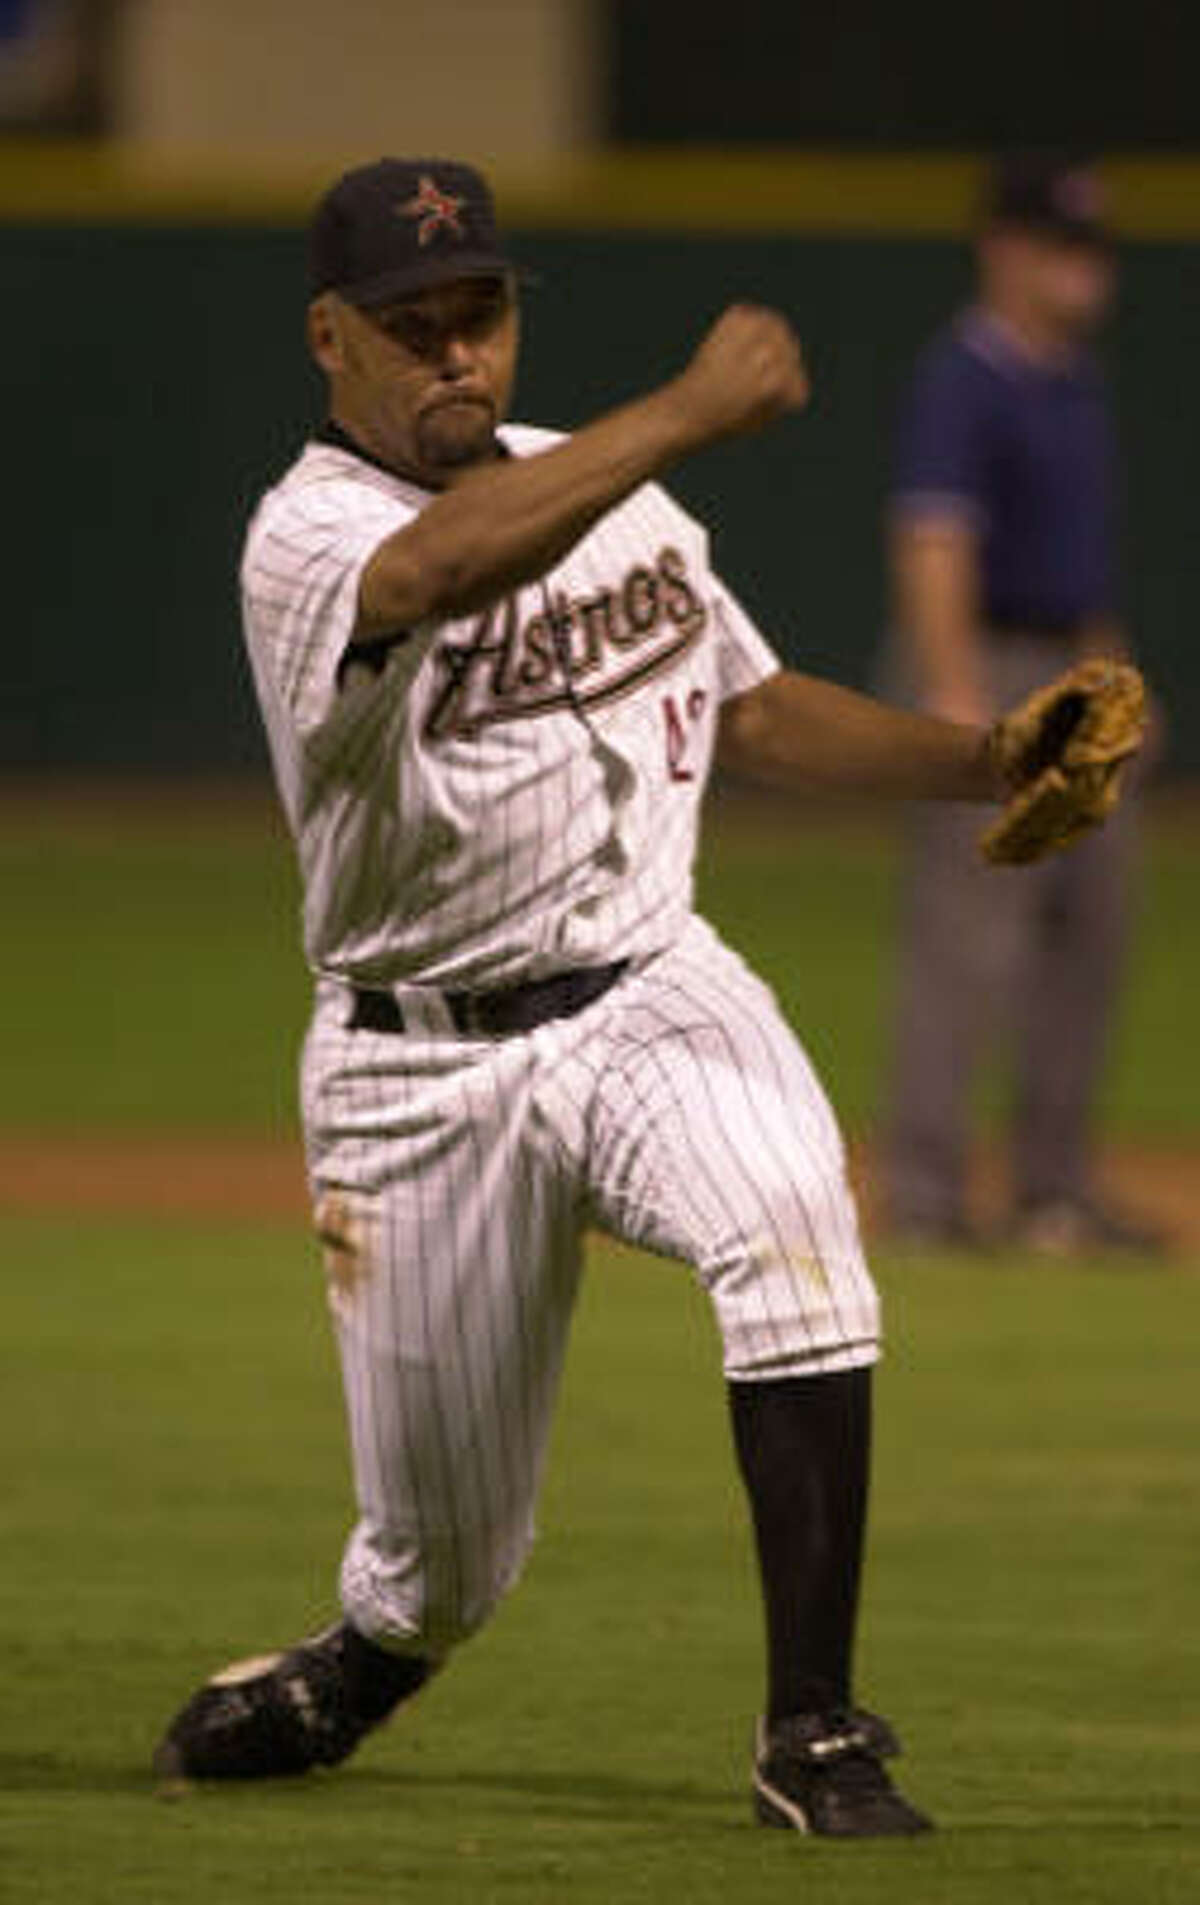 Lima spent the majority of his career in Houston, where he went 46-42 from 1997-2001.